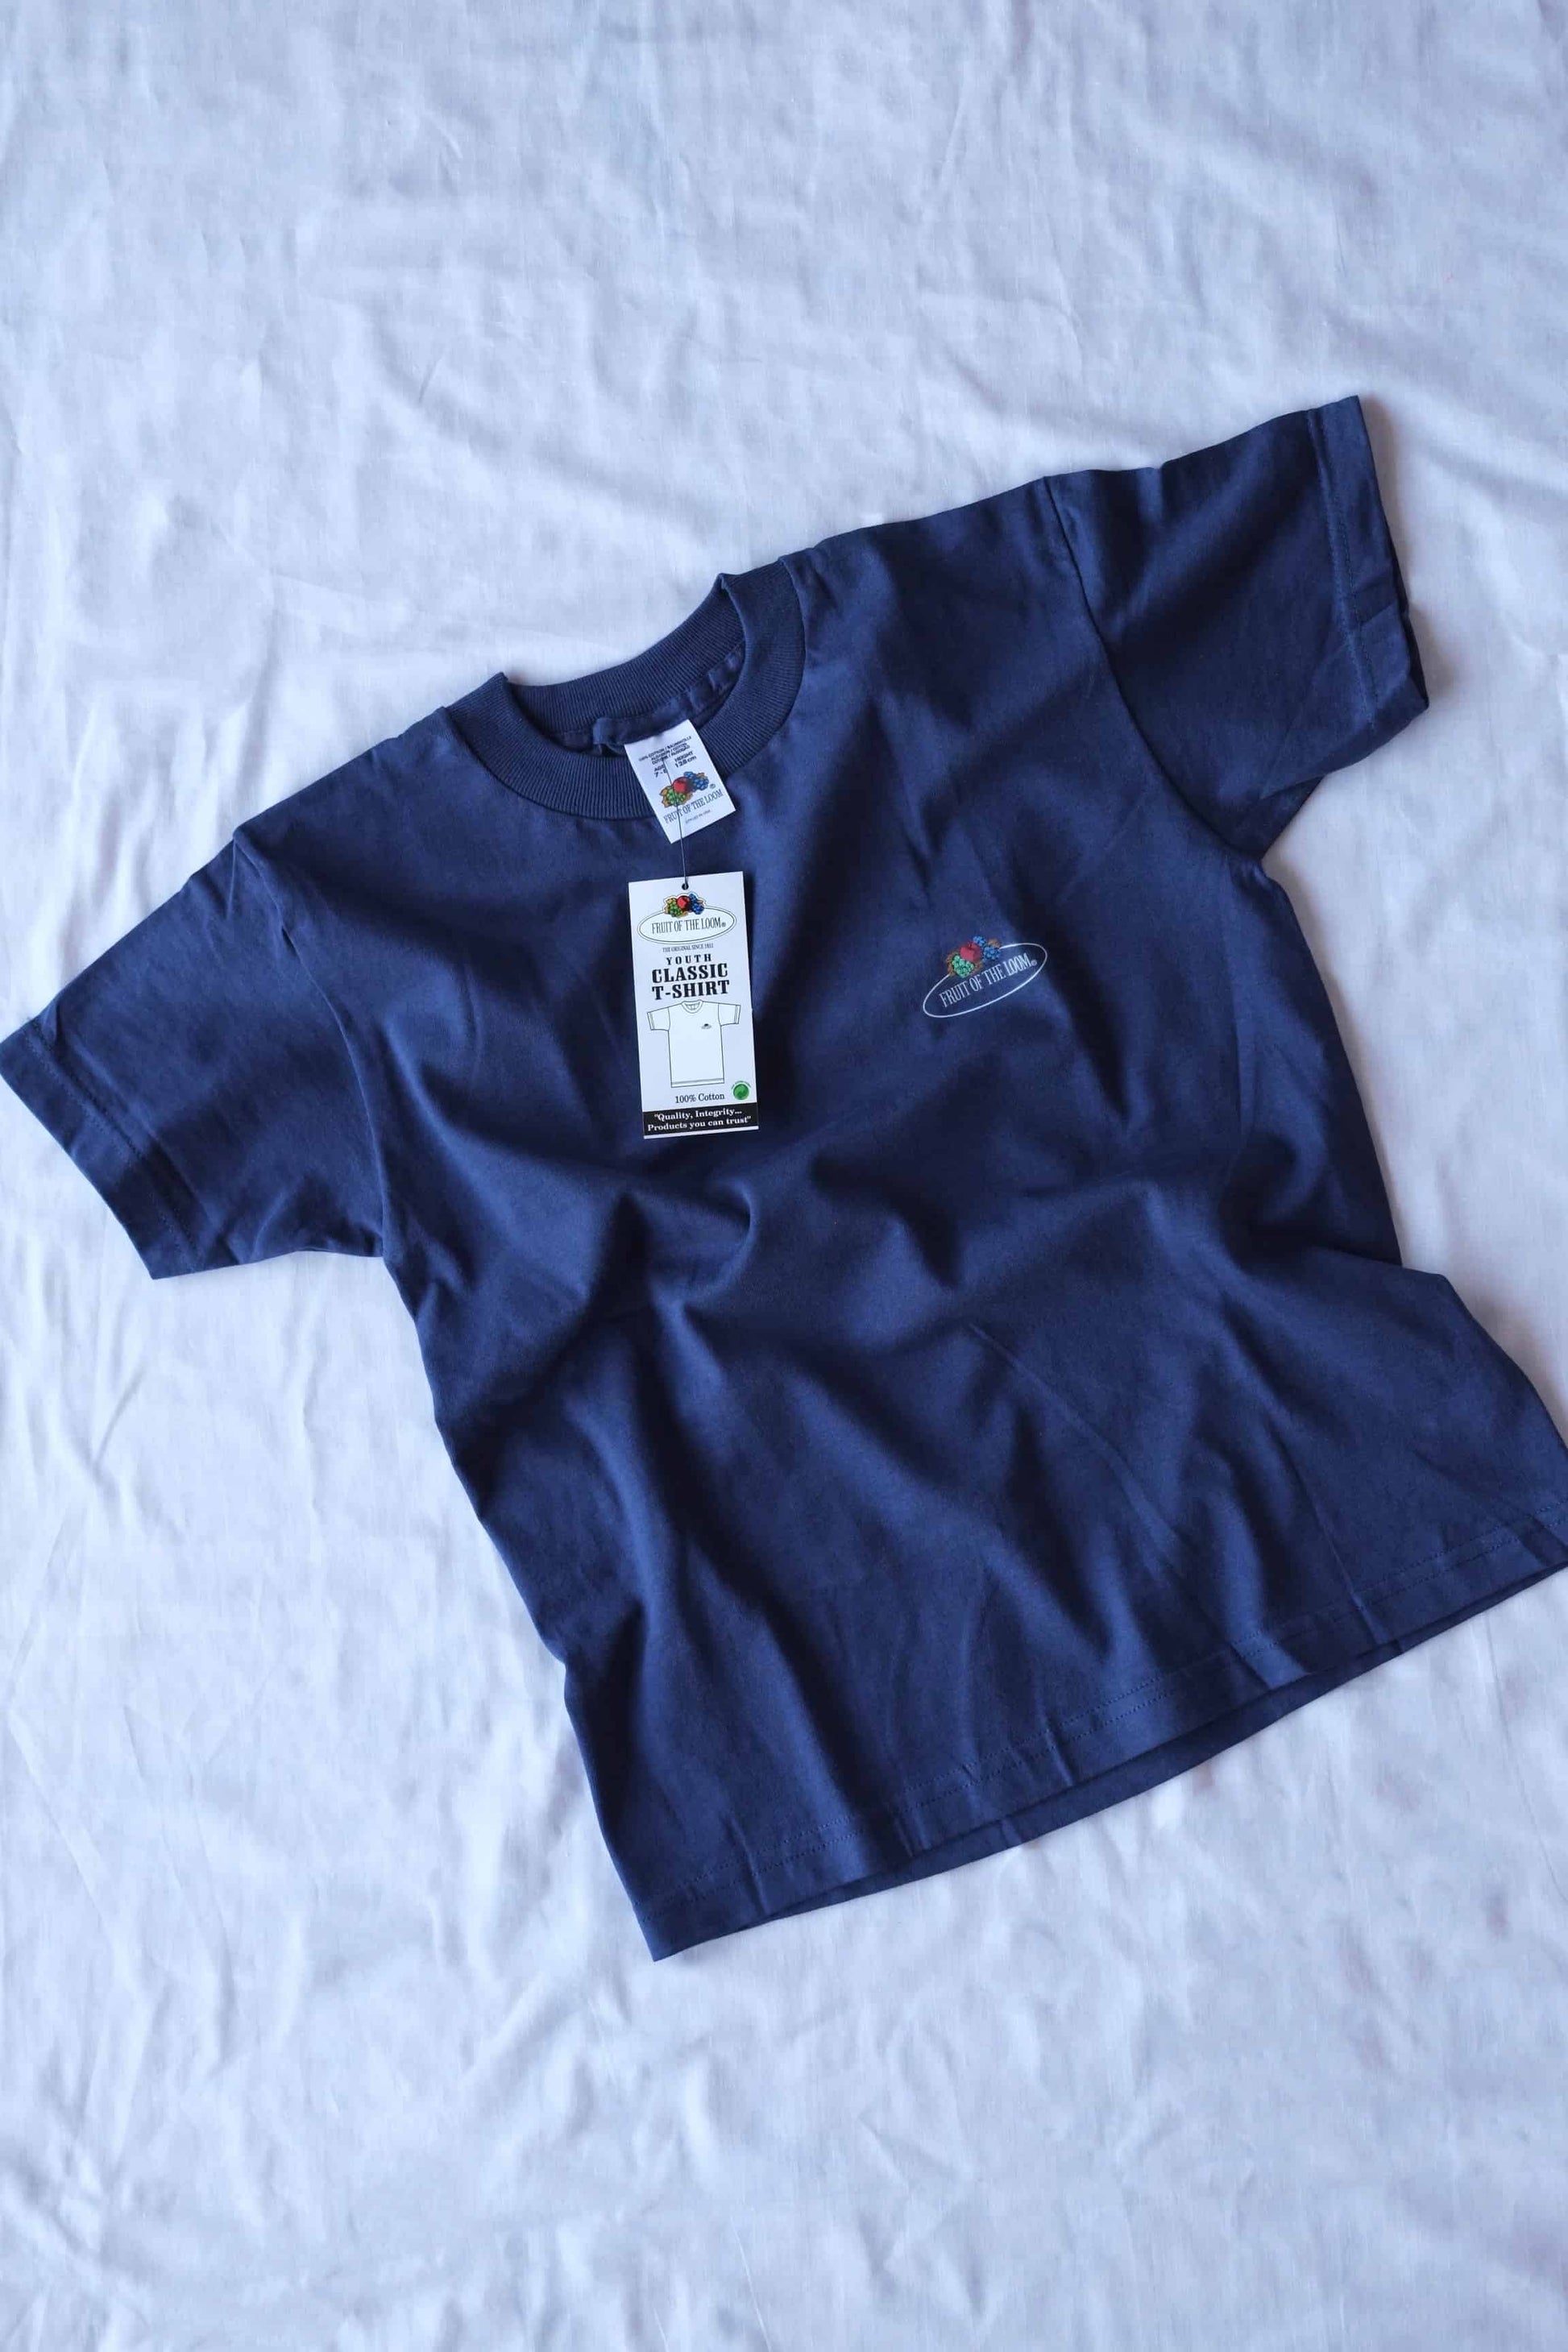 FRUIT OF THE LOOM Kids Classic T-shirt in color navy laid on white background